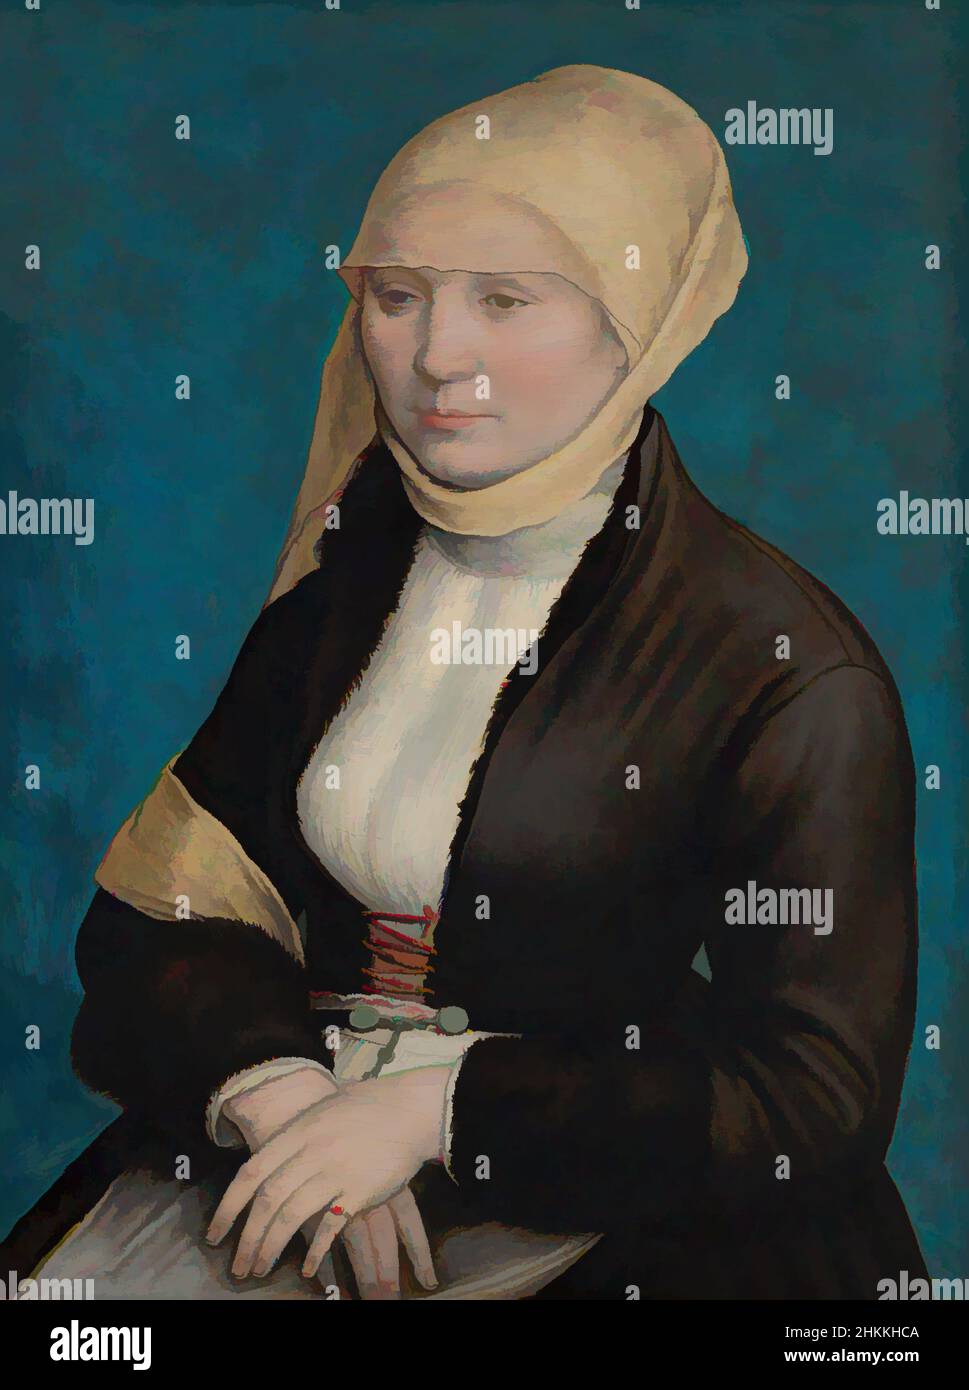 Art inspired by Portrait of a South German woman, Hans Holbein de Jonge, formerly attributed to, c. 1520 - 1525, Classic works modernized by Artotop with a splash of modernity. Shapes, color and value, eye-catching visual impact on art. Emotions through freedom of artworks in a contemporary way. A timeless message pursuing a wildly creative new direction. Artists turning to the digital medium and creating the Artotop NFT Stock Photo